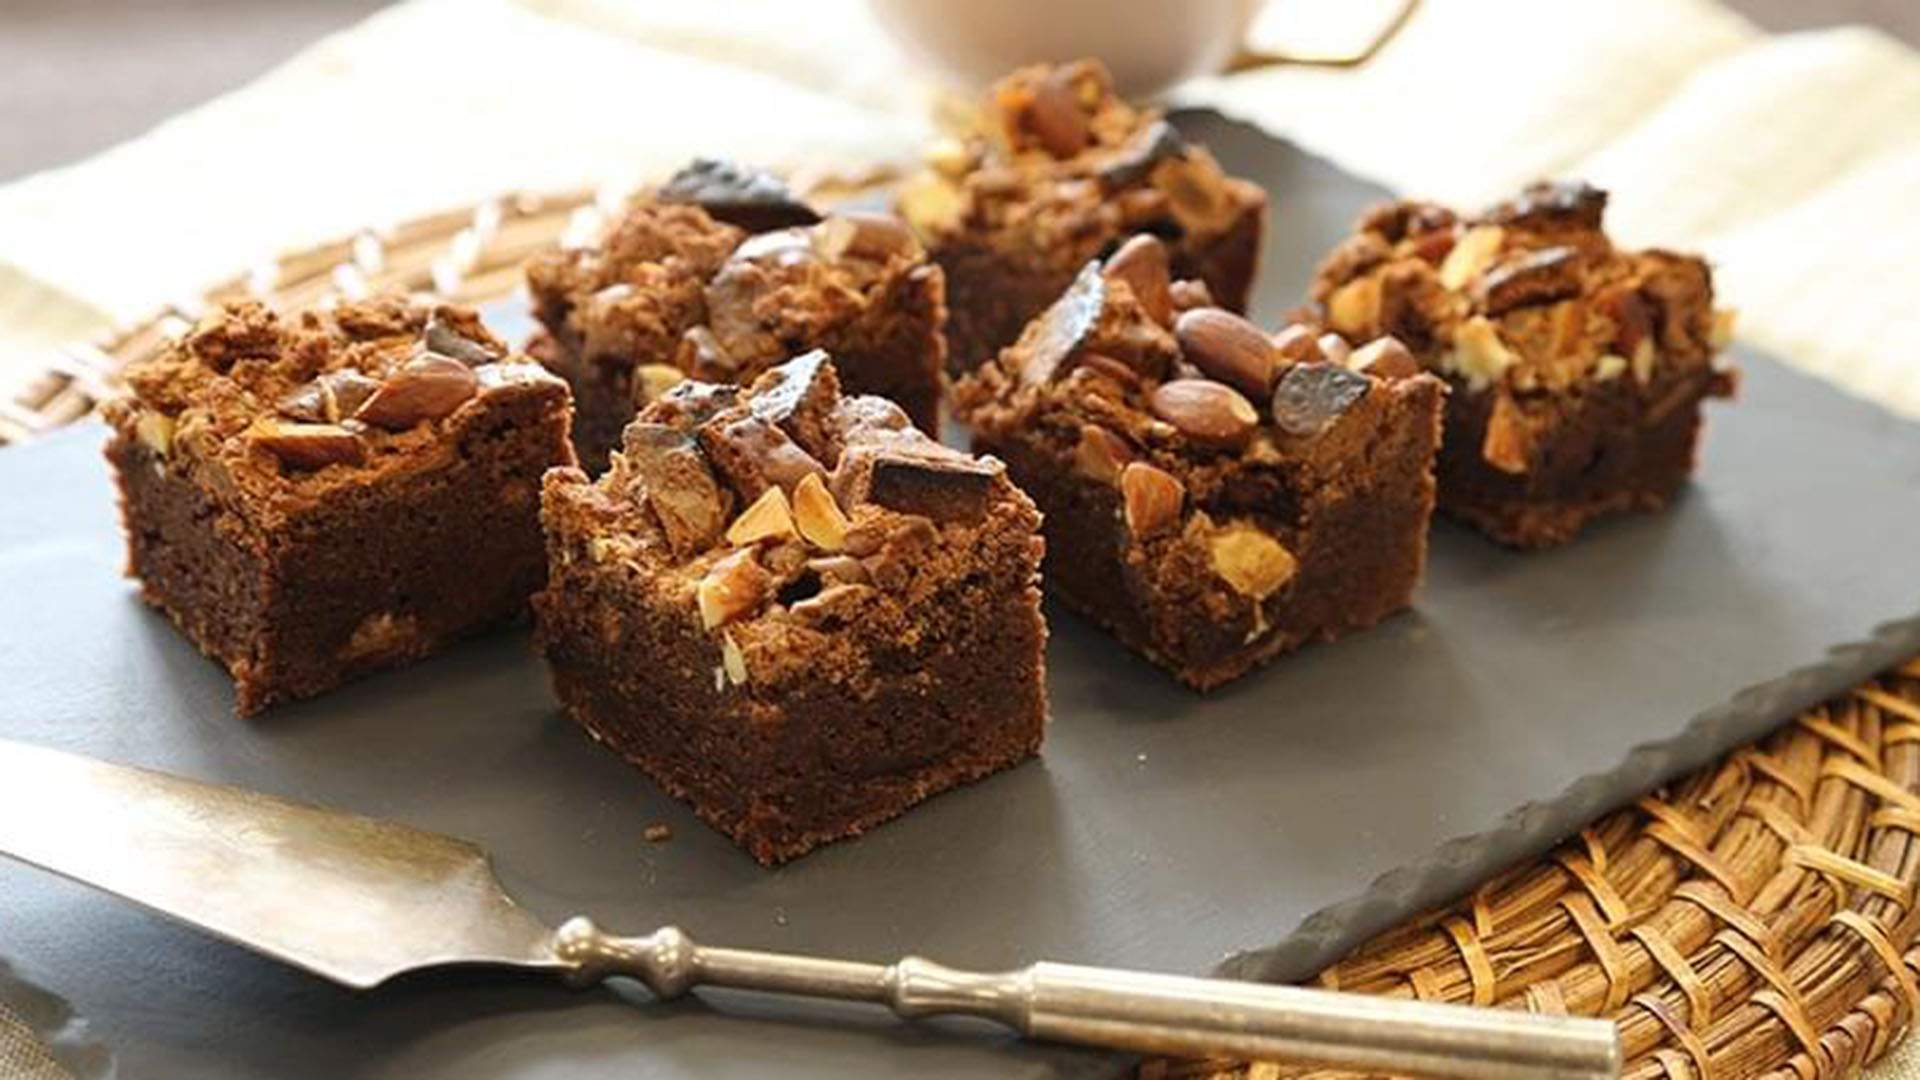 Arnott's Has Just Released a Supremely Decadent Recipe for Tim Tam Brownies